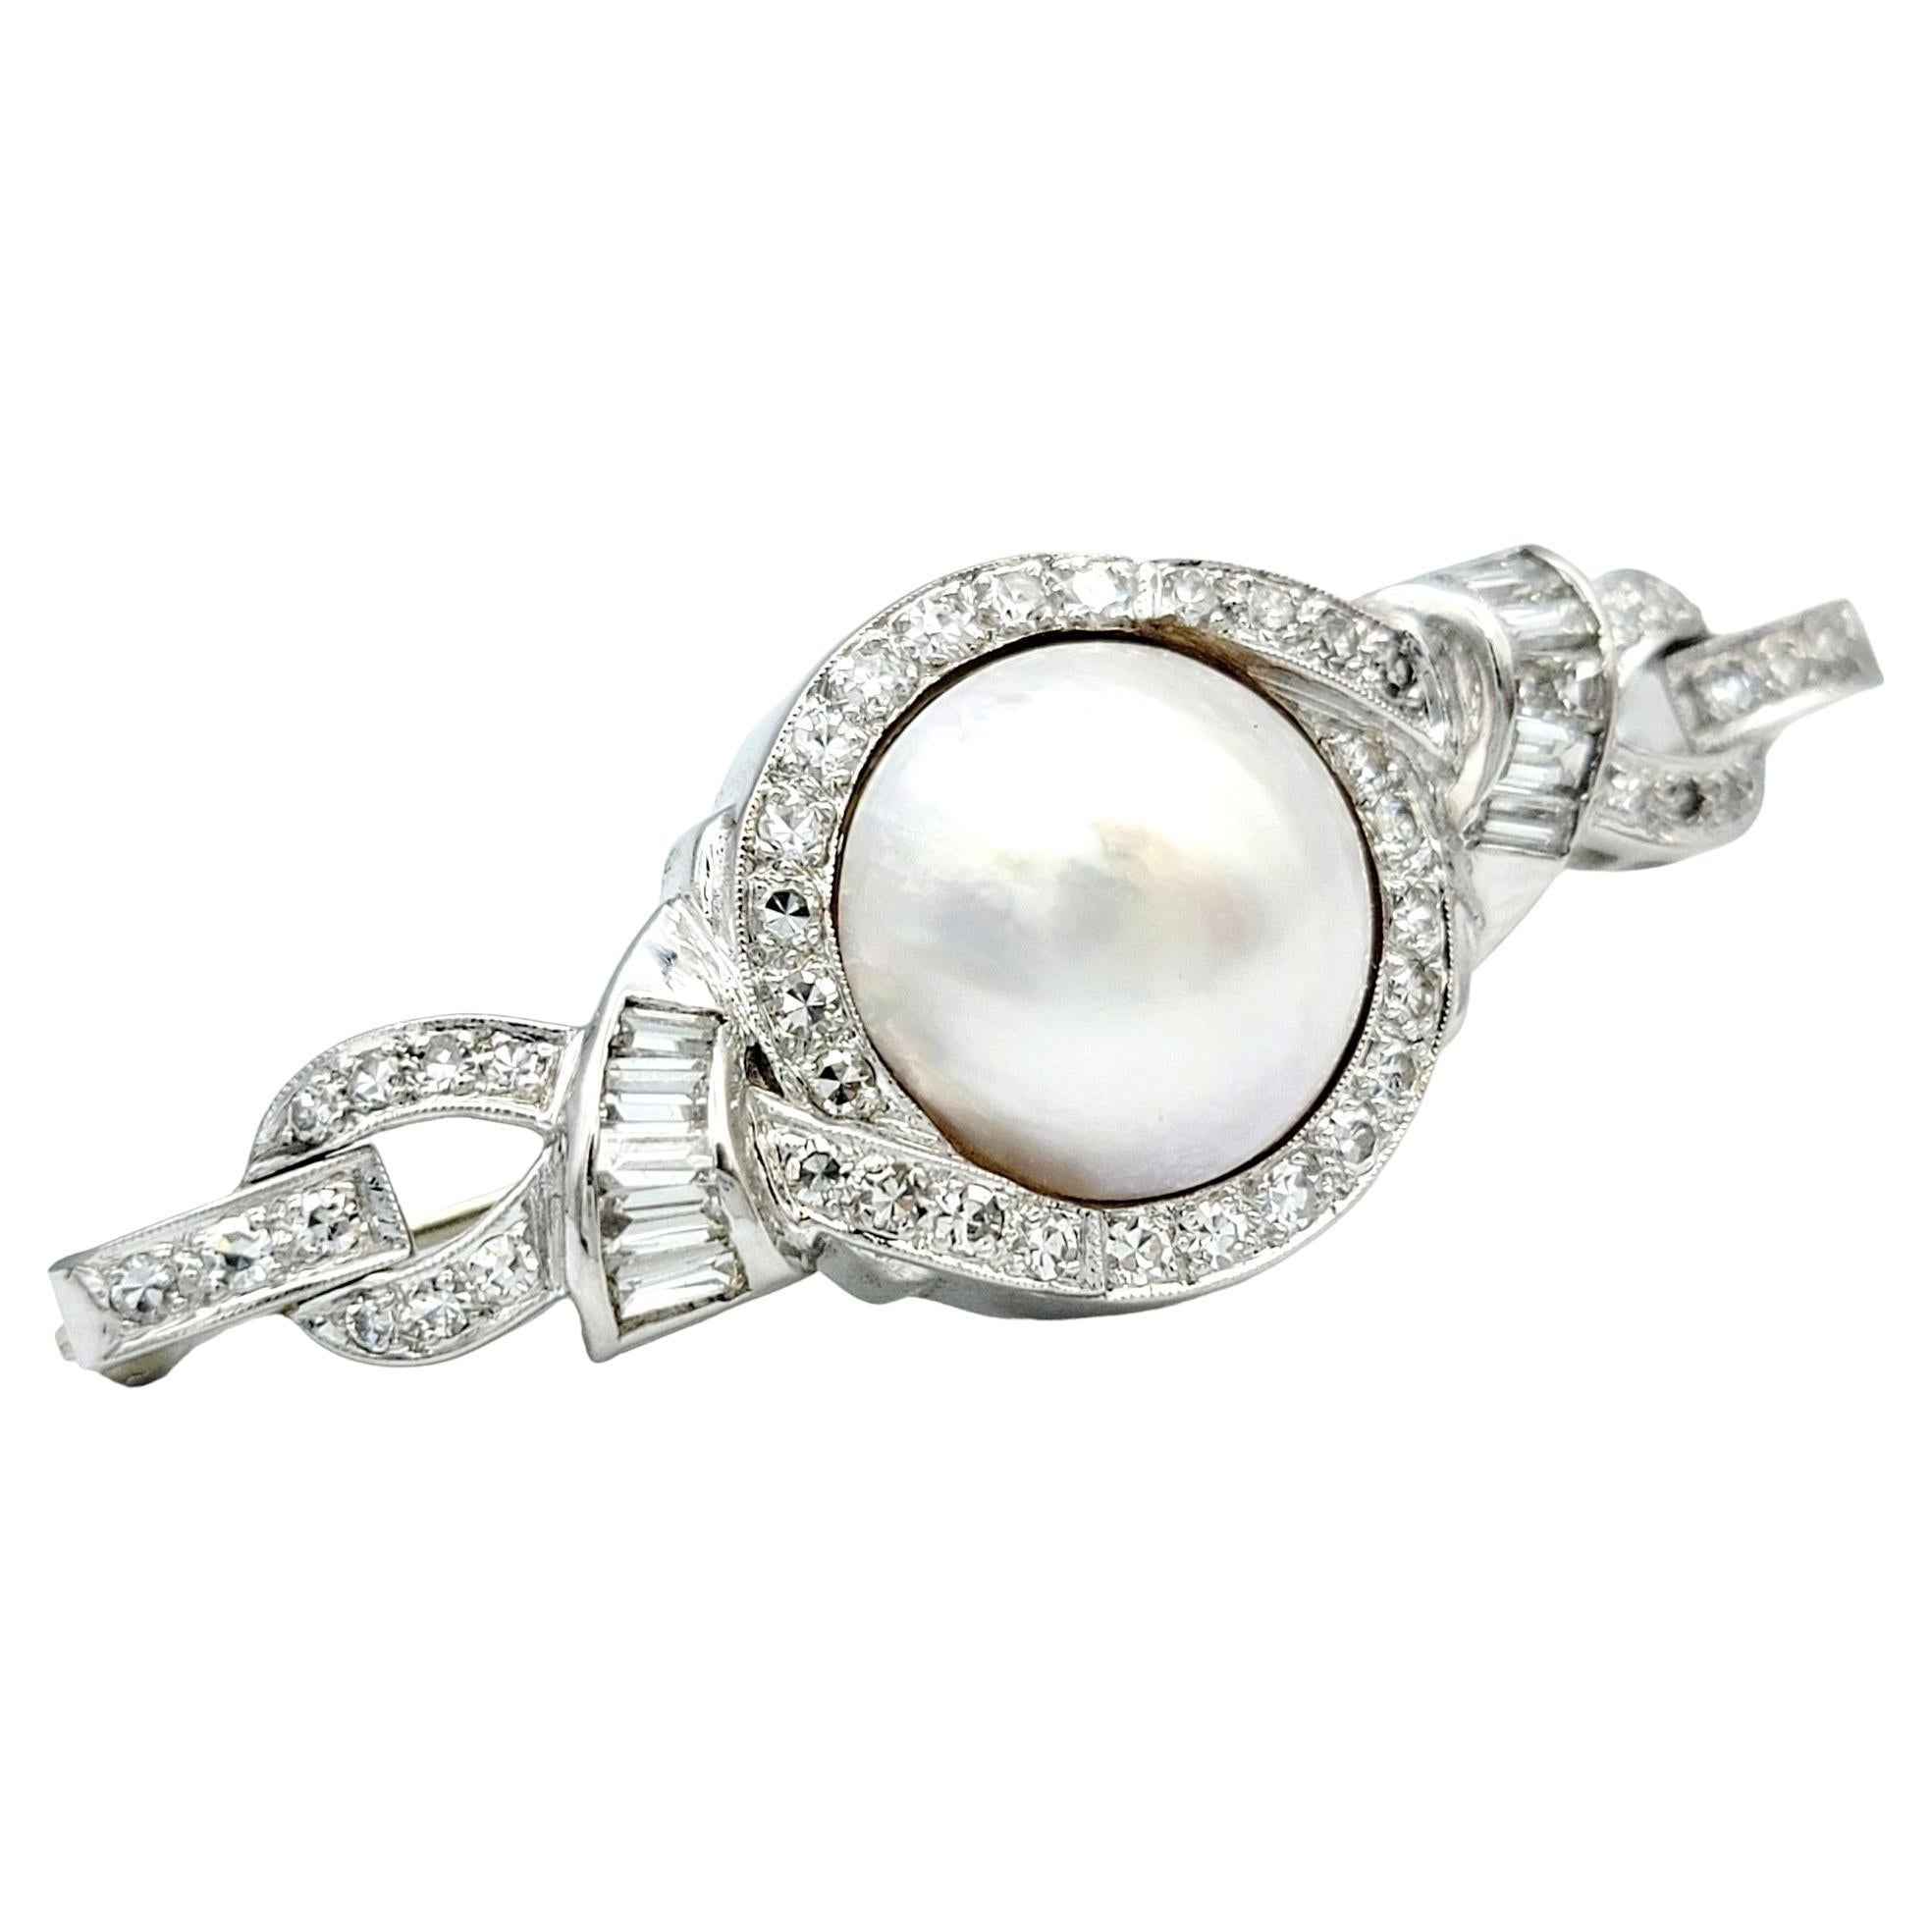 This exquisite brooch will bring elegance and artistry to your fine jewelry collection. At its heart, a resplendent mabe pearl, an iridescent and lustrous marvel, commands attention with its timeless allure. It is cradled within an intricate ribbon